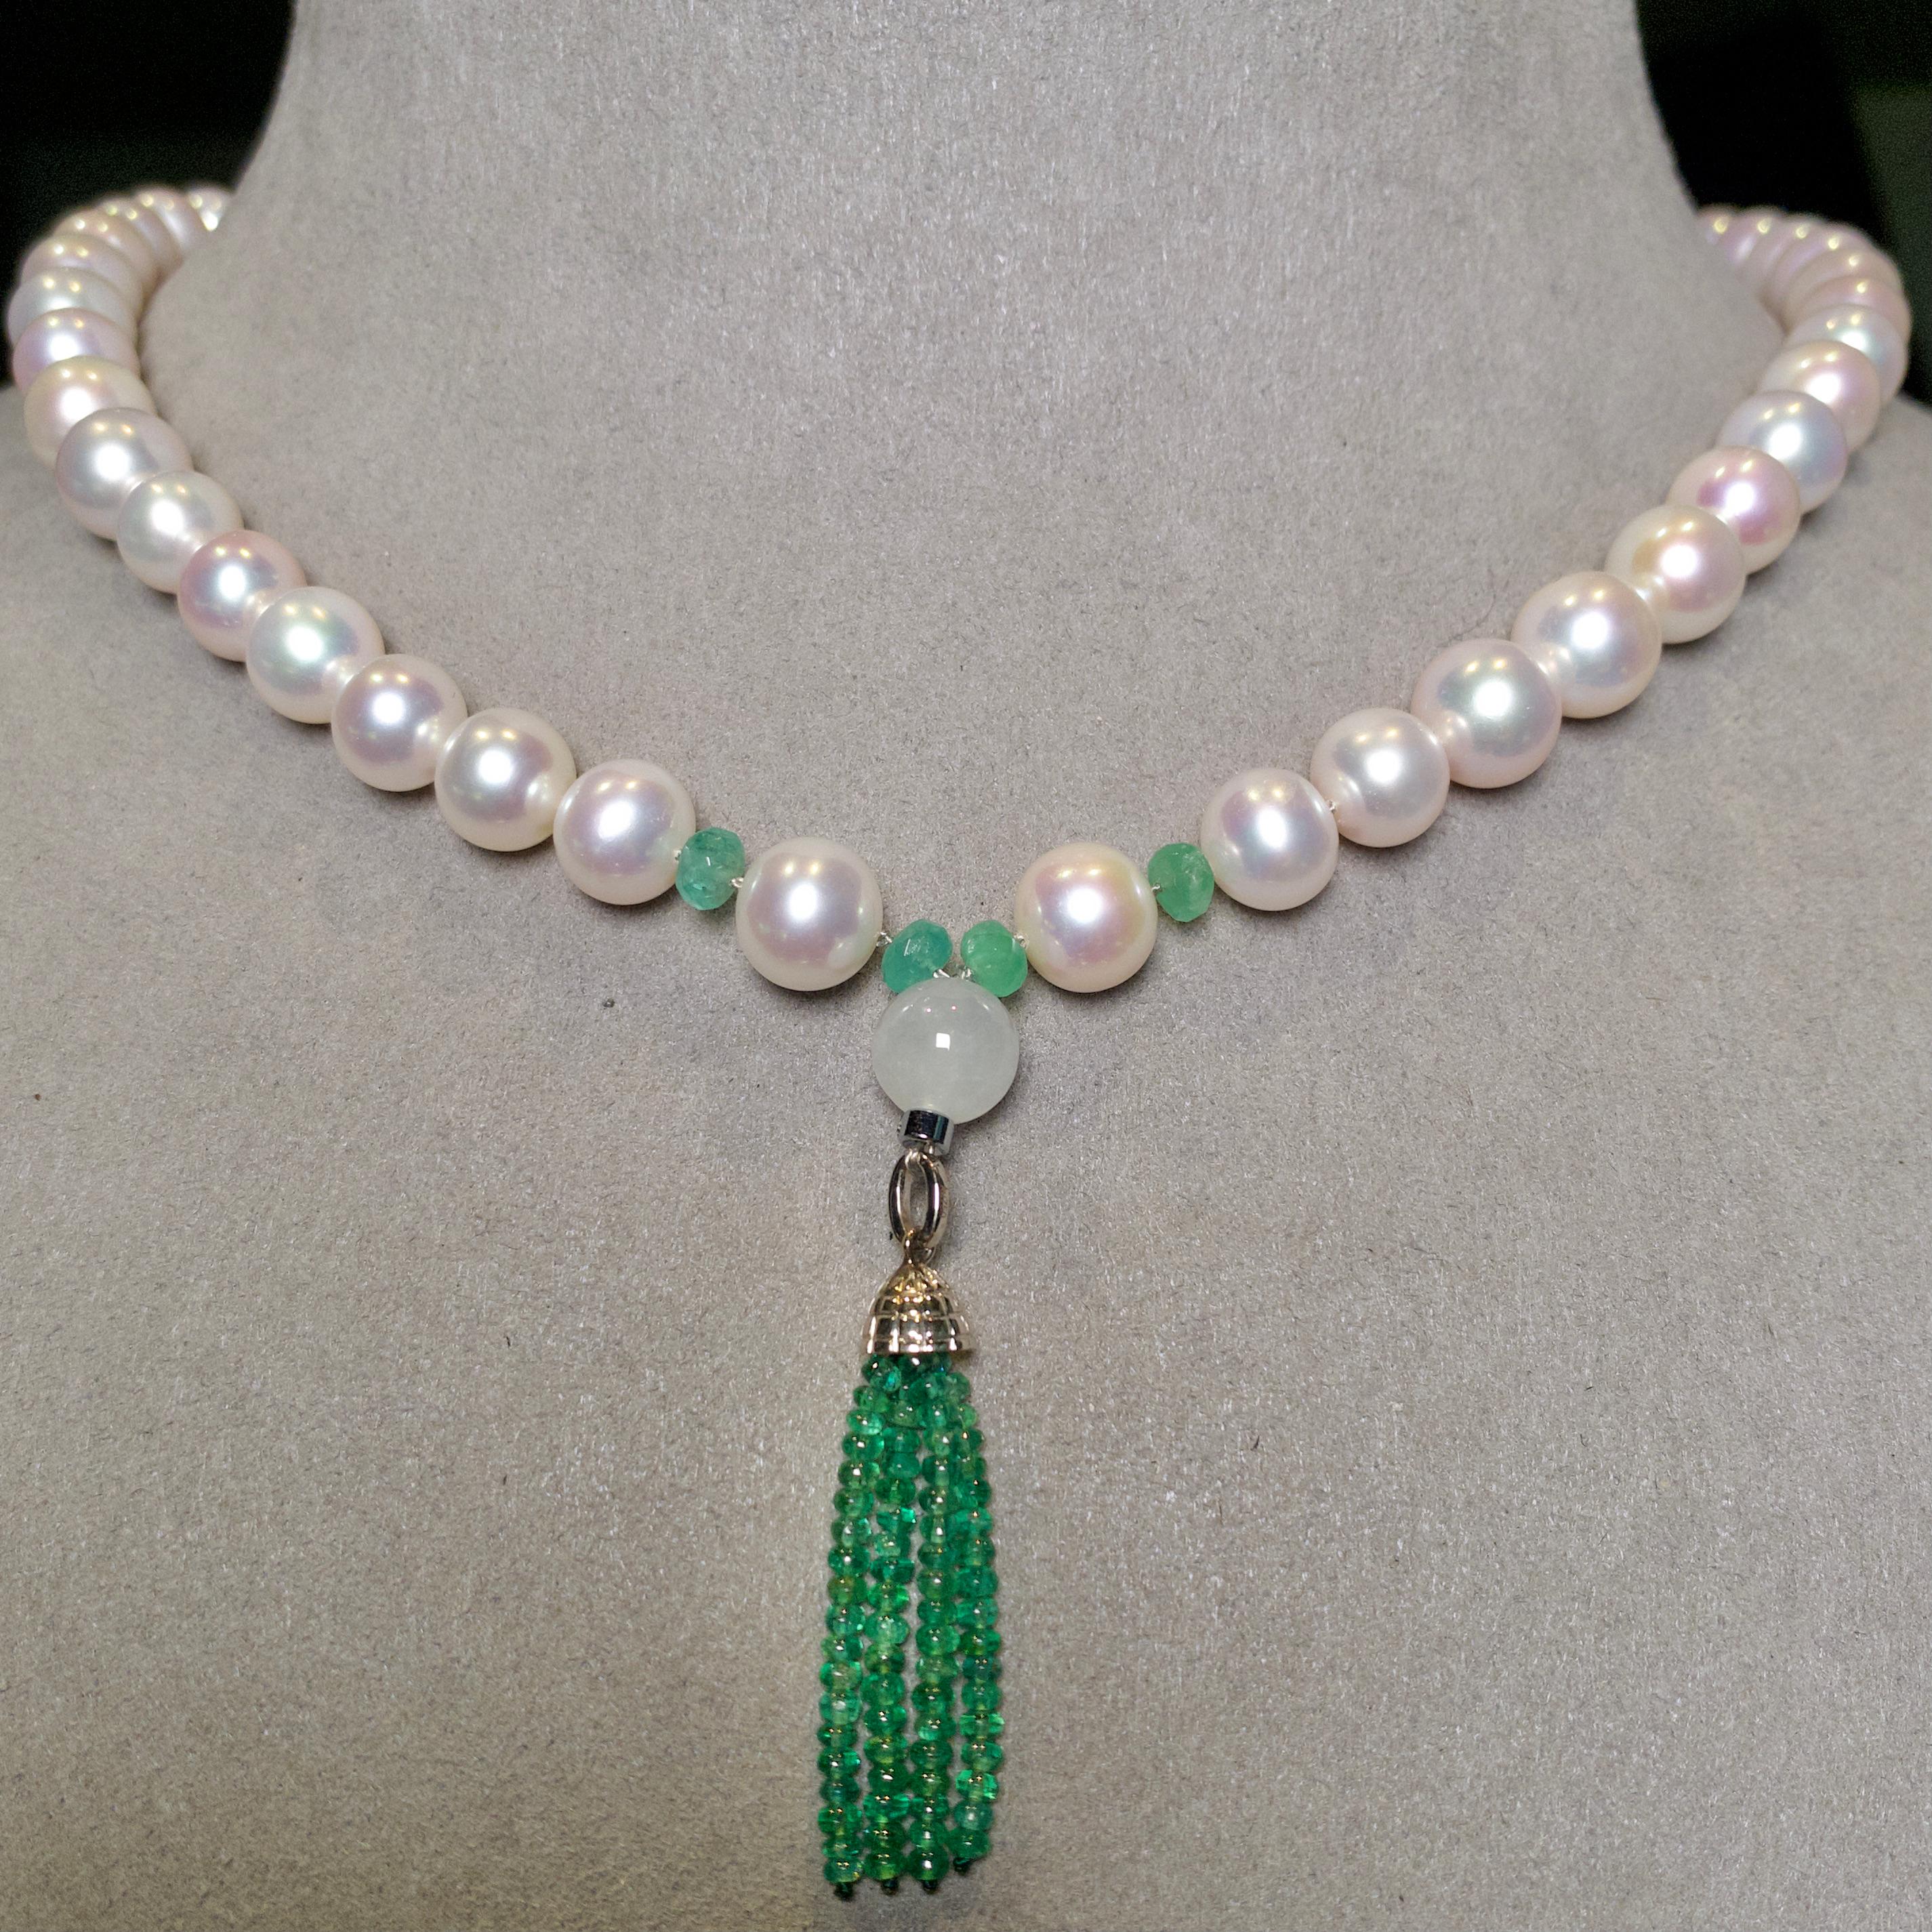 A White Freshwater Pearl, Emerald Bead and Jadeite Bead Necklace with 18k Gold Clasp
Pearls are measuring 8.5 mm to 9 mm 
The colour of the pearls is White with Greena nd Pink Overtone
The Pearls are of Excellent Lustre with smooth surface 
Small